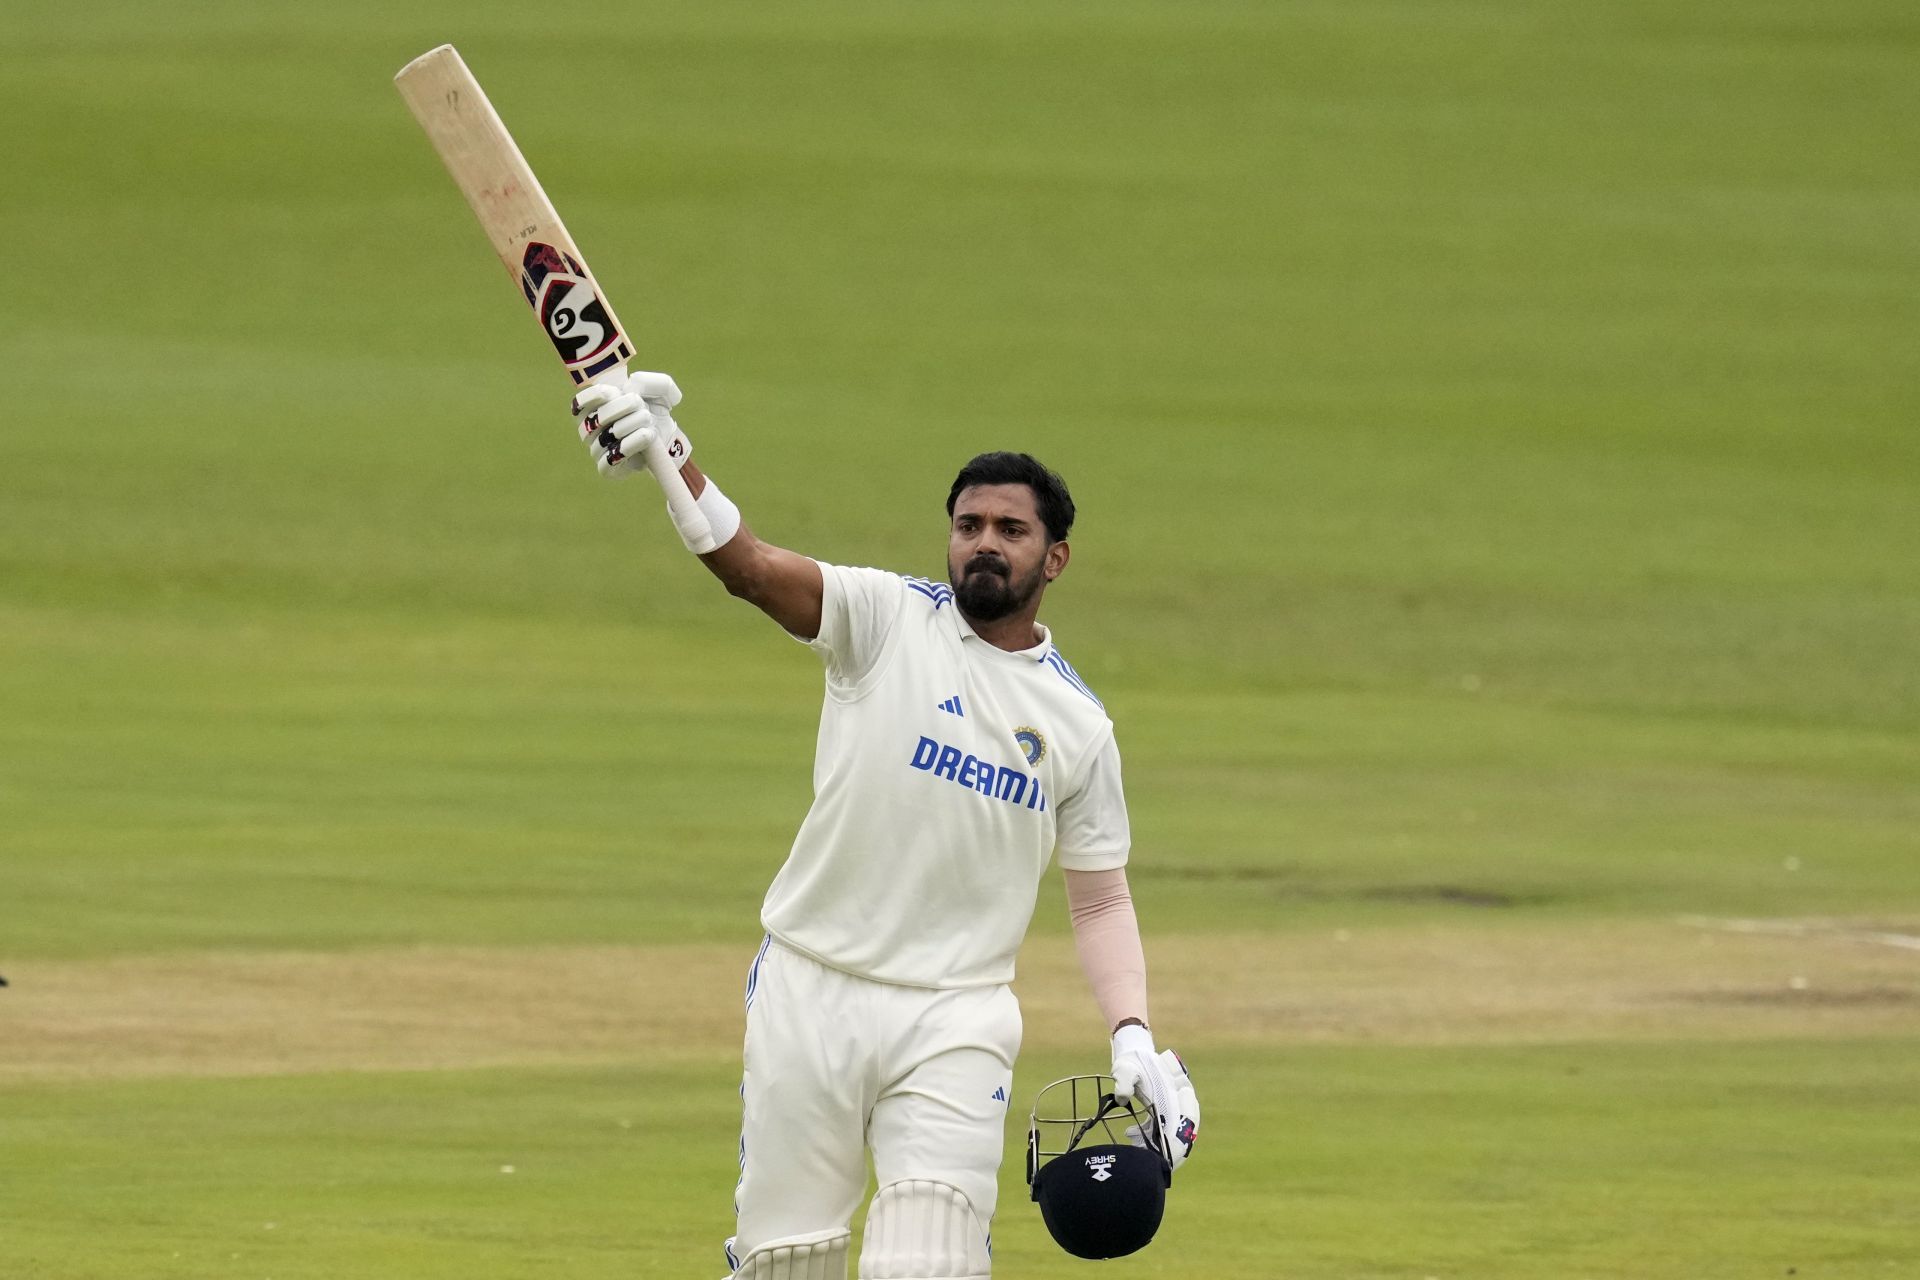 KL Rahul notched up an assured century in the first innings